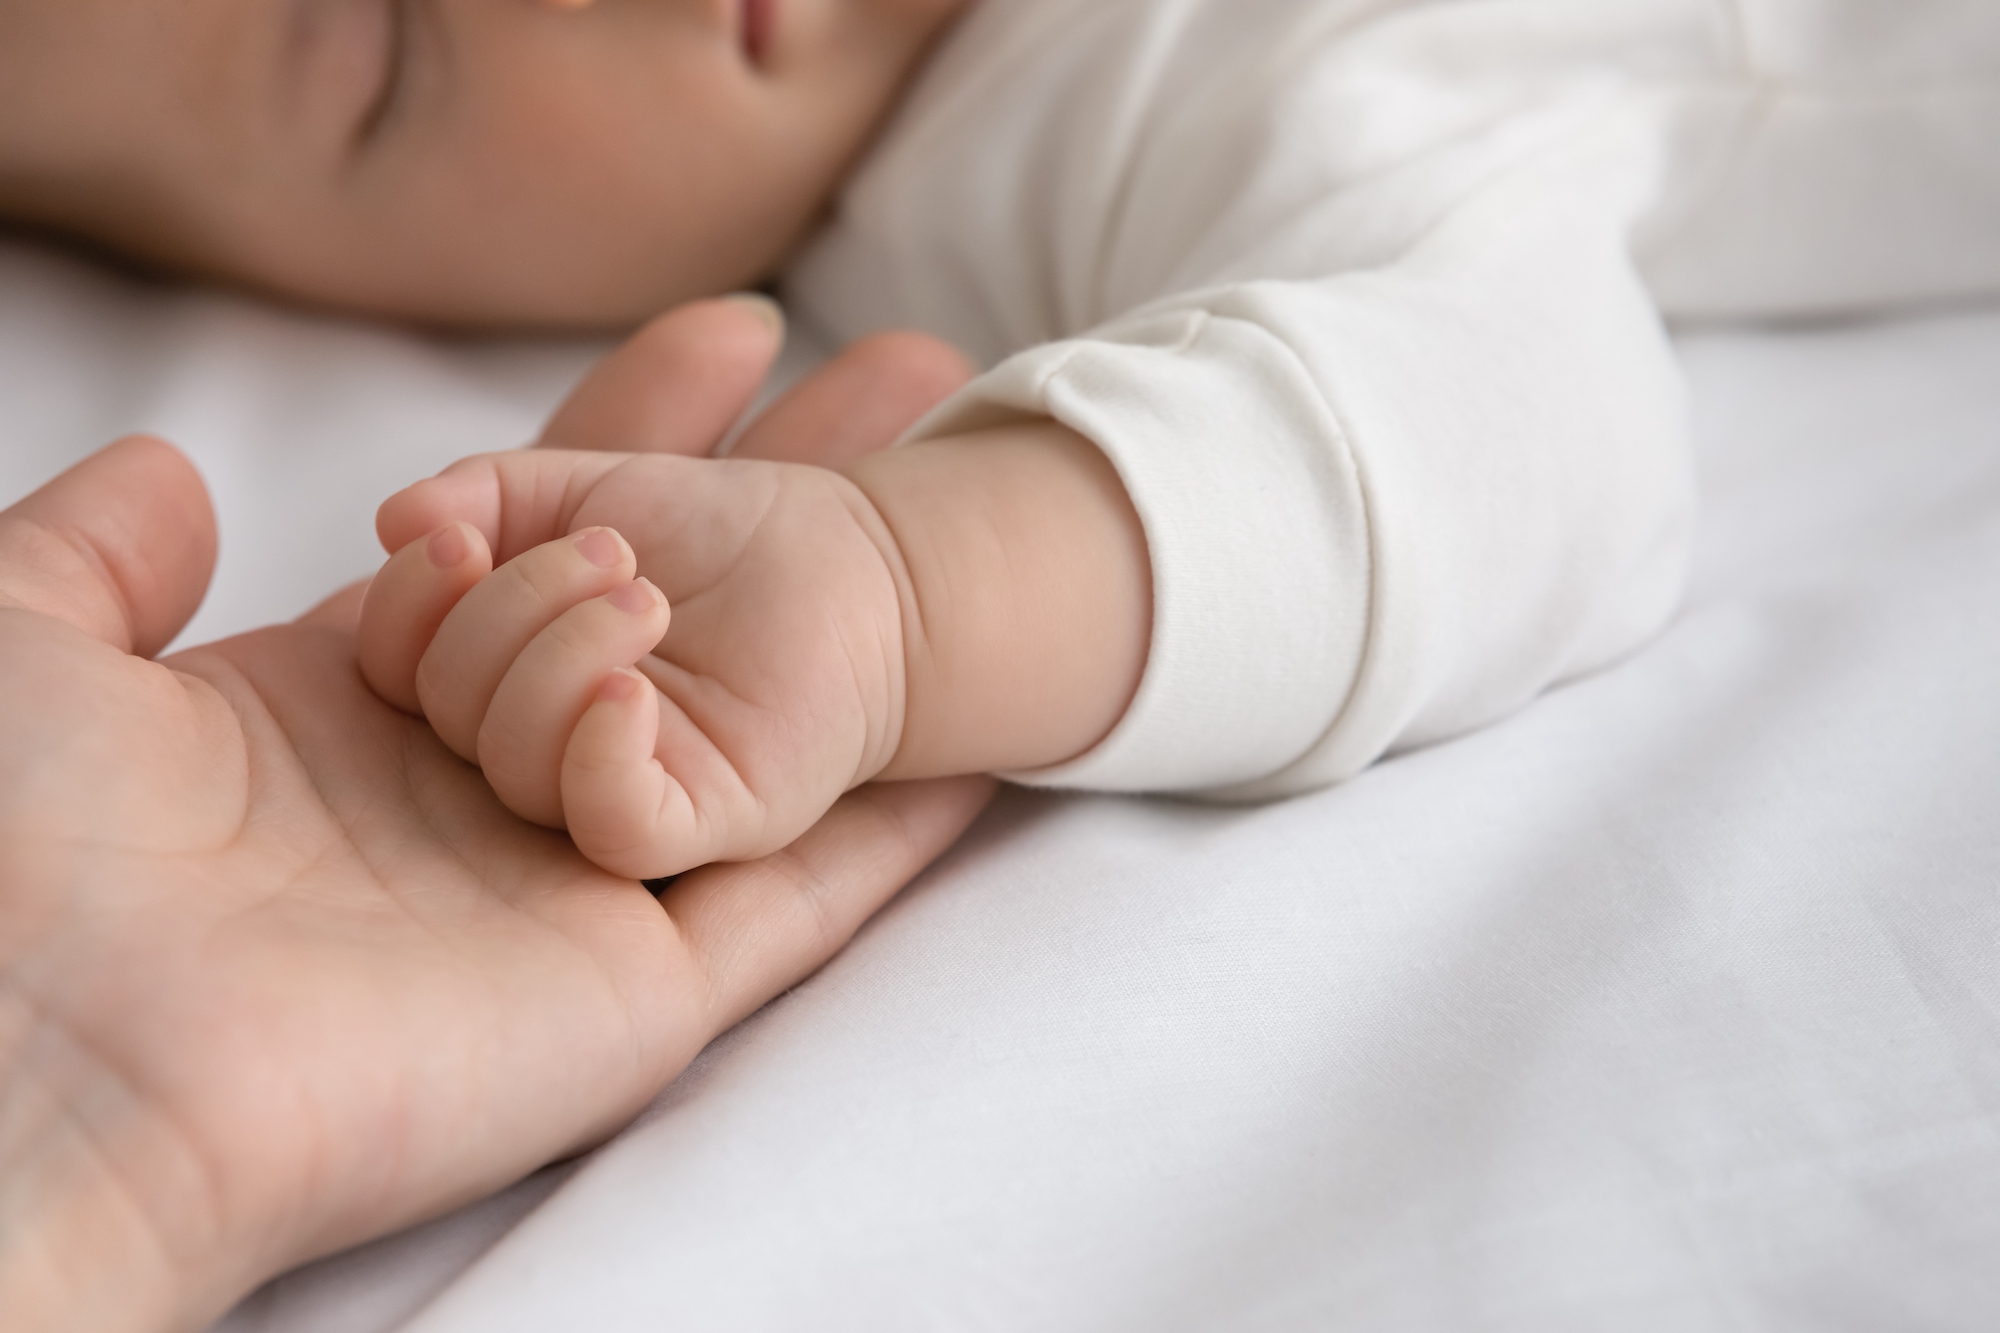 New mom and newborn baby hands close up. Mother holding arm of few month infant son or daughter sleeping on white sheet, touching kid with love and tenderness. Childbirth, motherhood concept. Close up